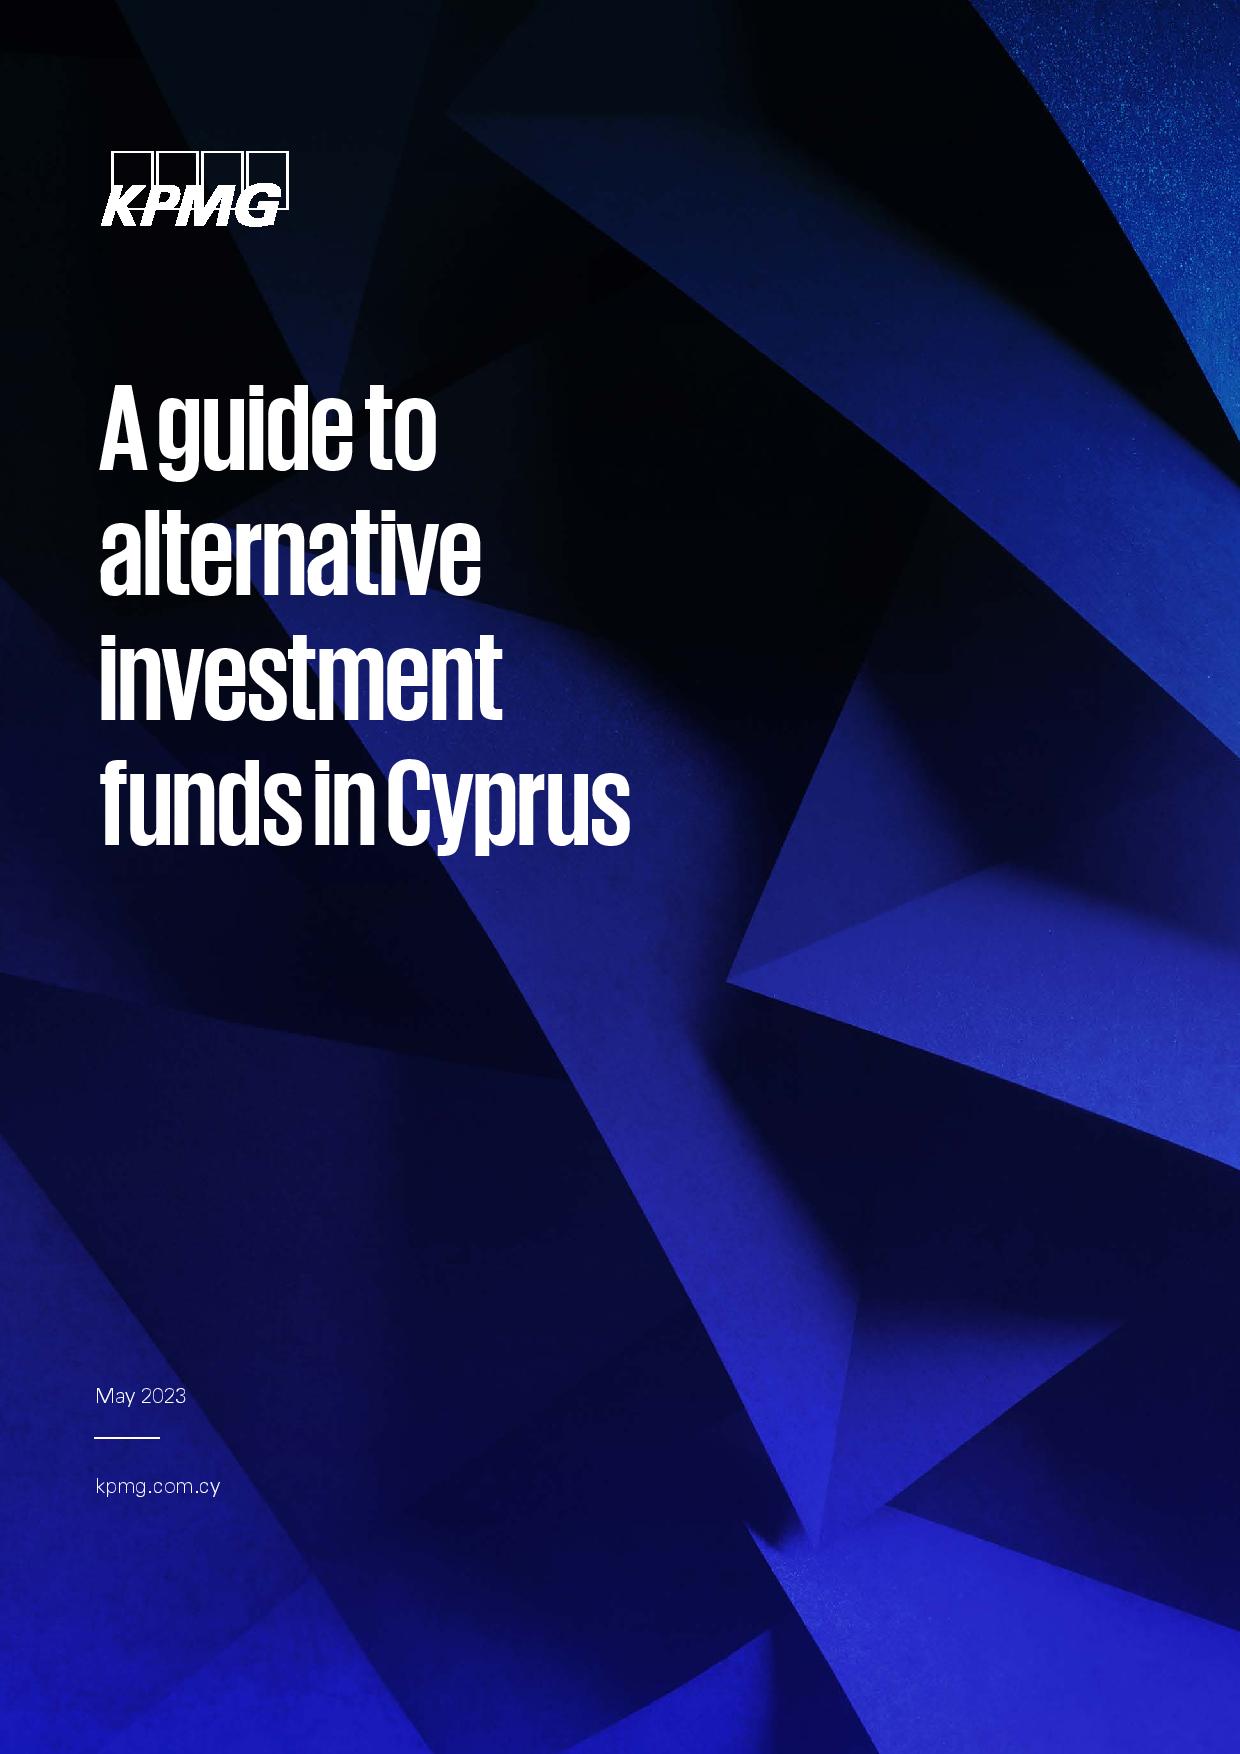 A Guide to Alternative Investment Funds in Cyprus